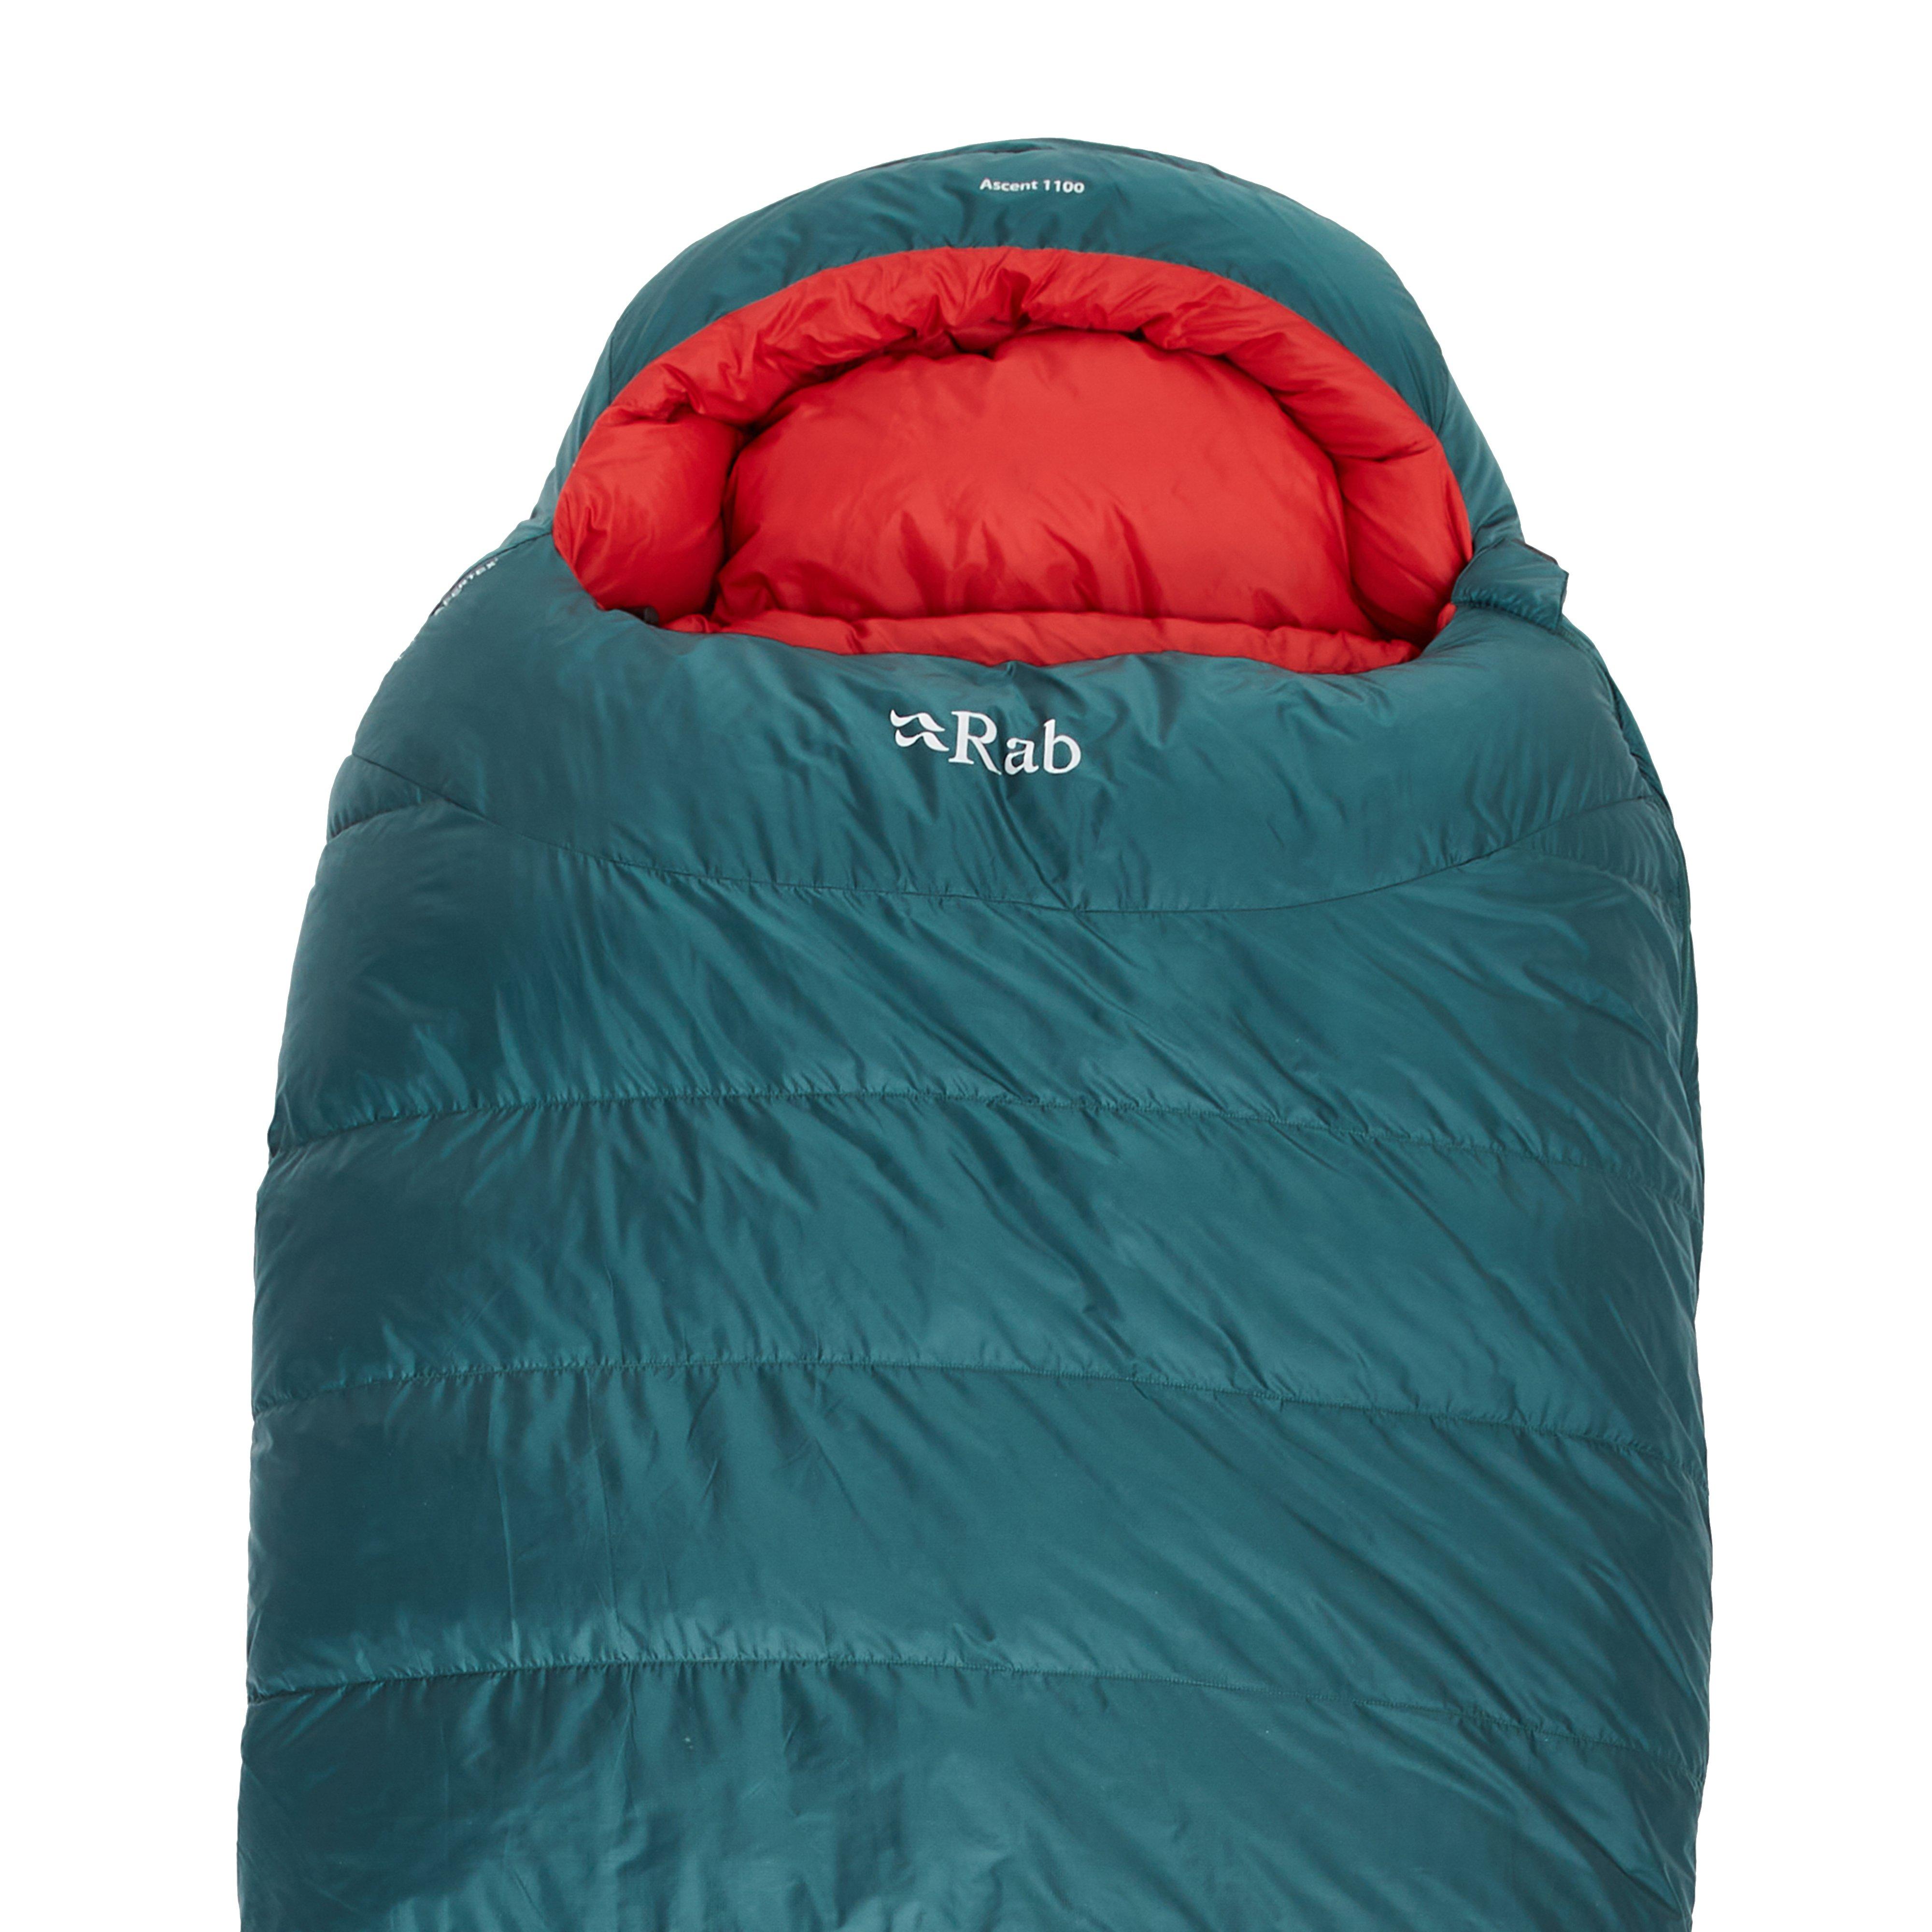 Rab Ascent 1100 Sleeping Bag Review